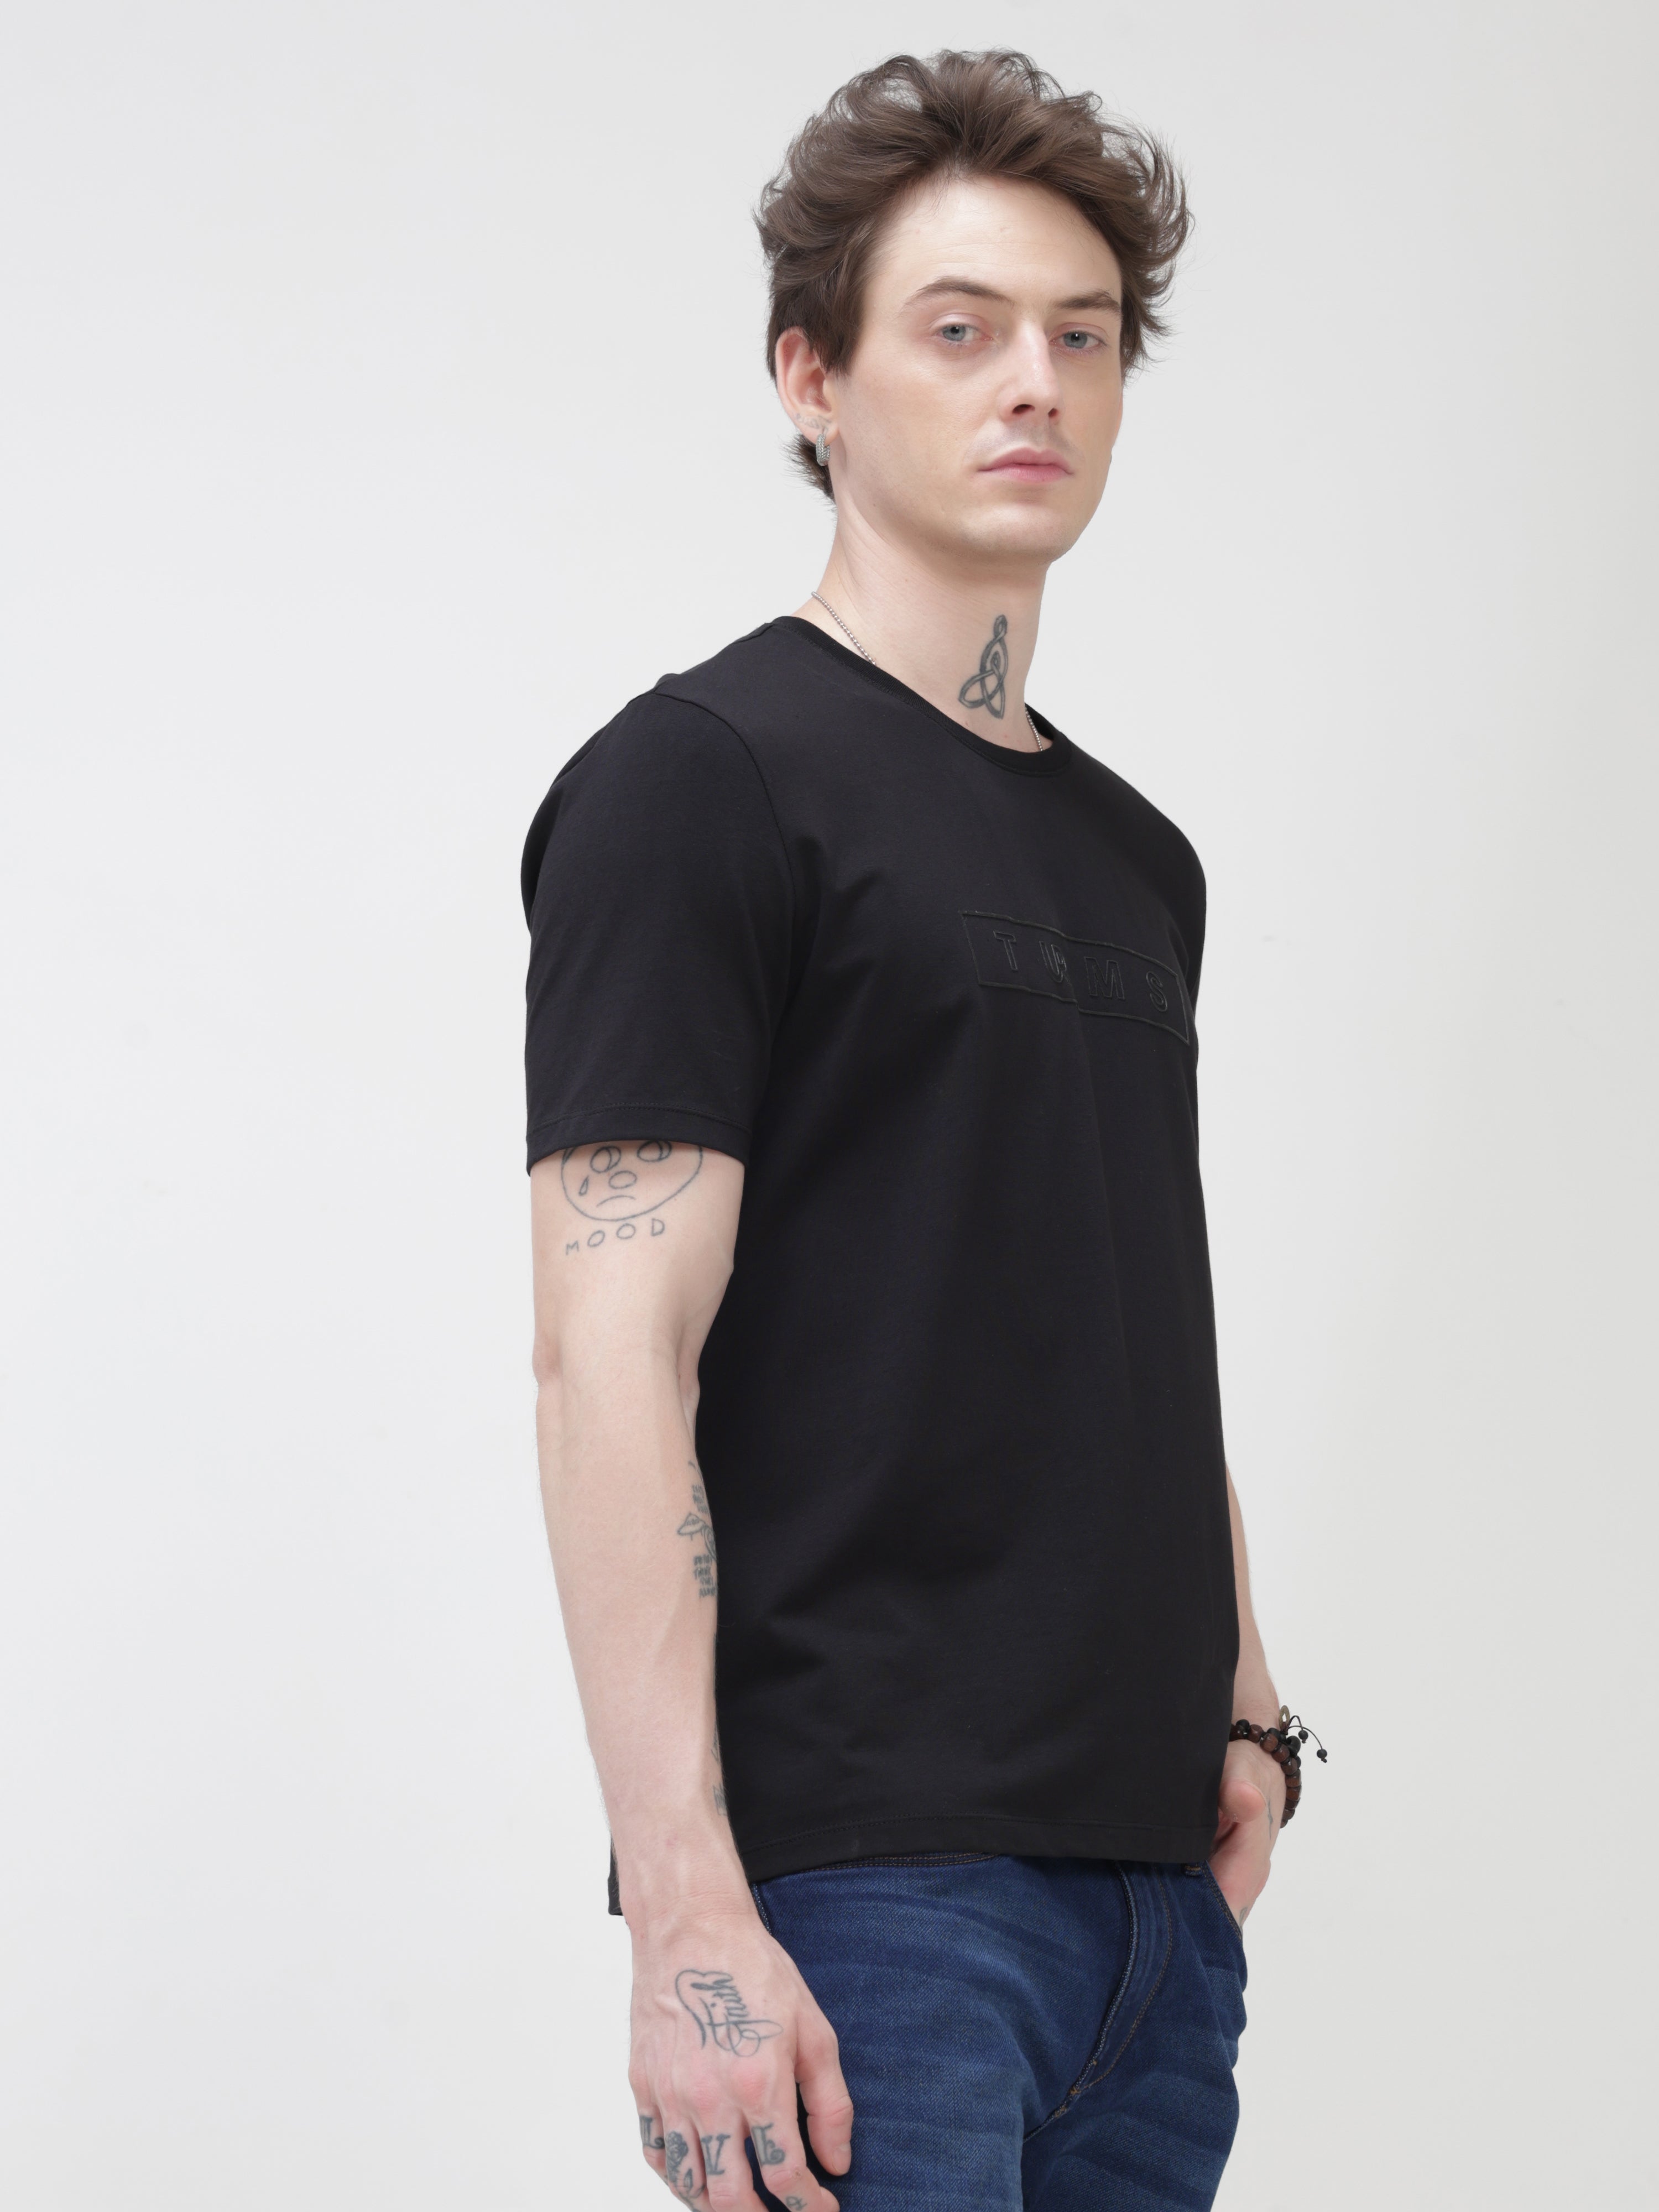 Man wearing Midnight Elegance Turms T-shirt, anti-stain and anti-odor, black round-neck, tailored fit, premium cotton blend, stylish casual wear.